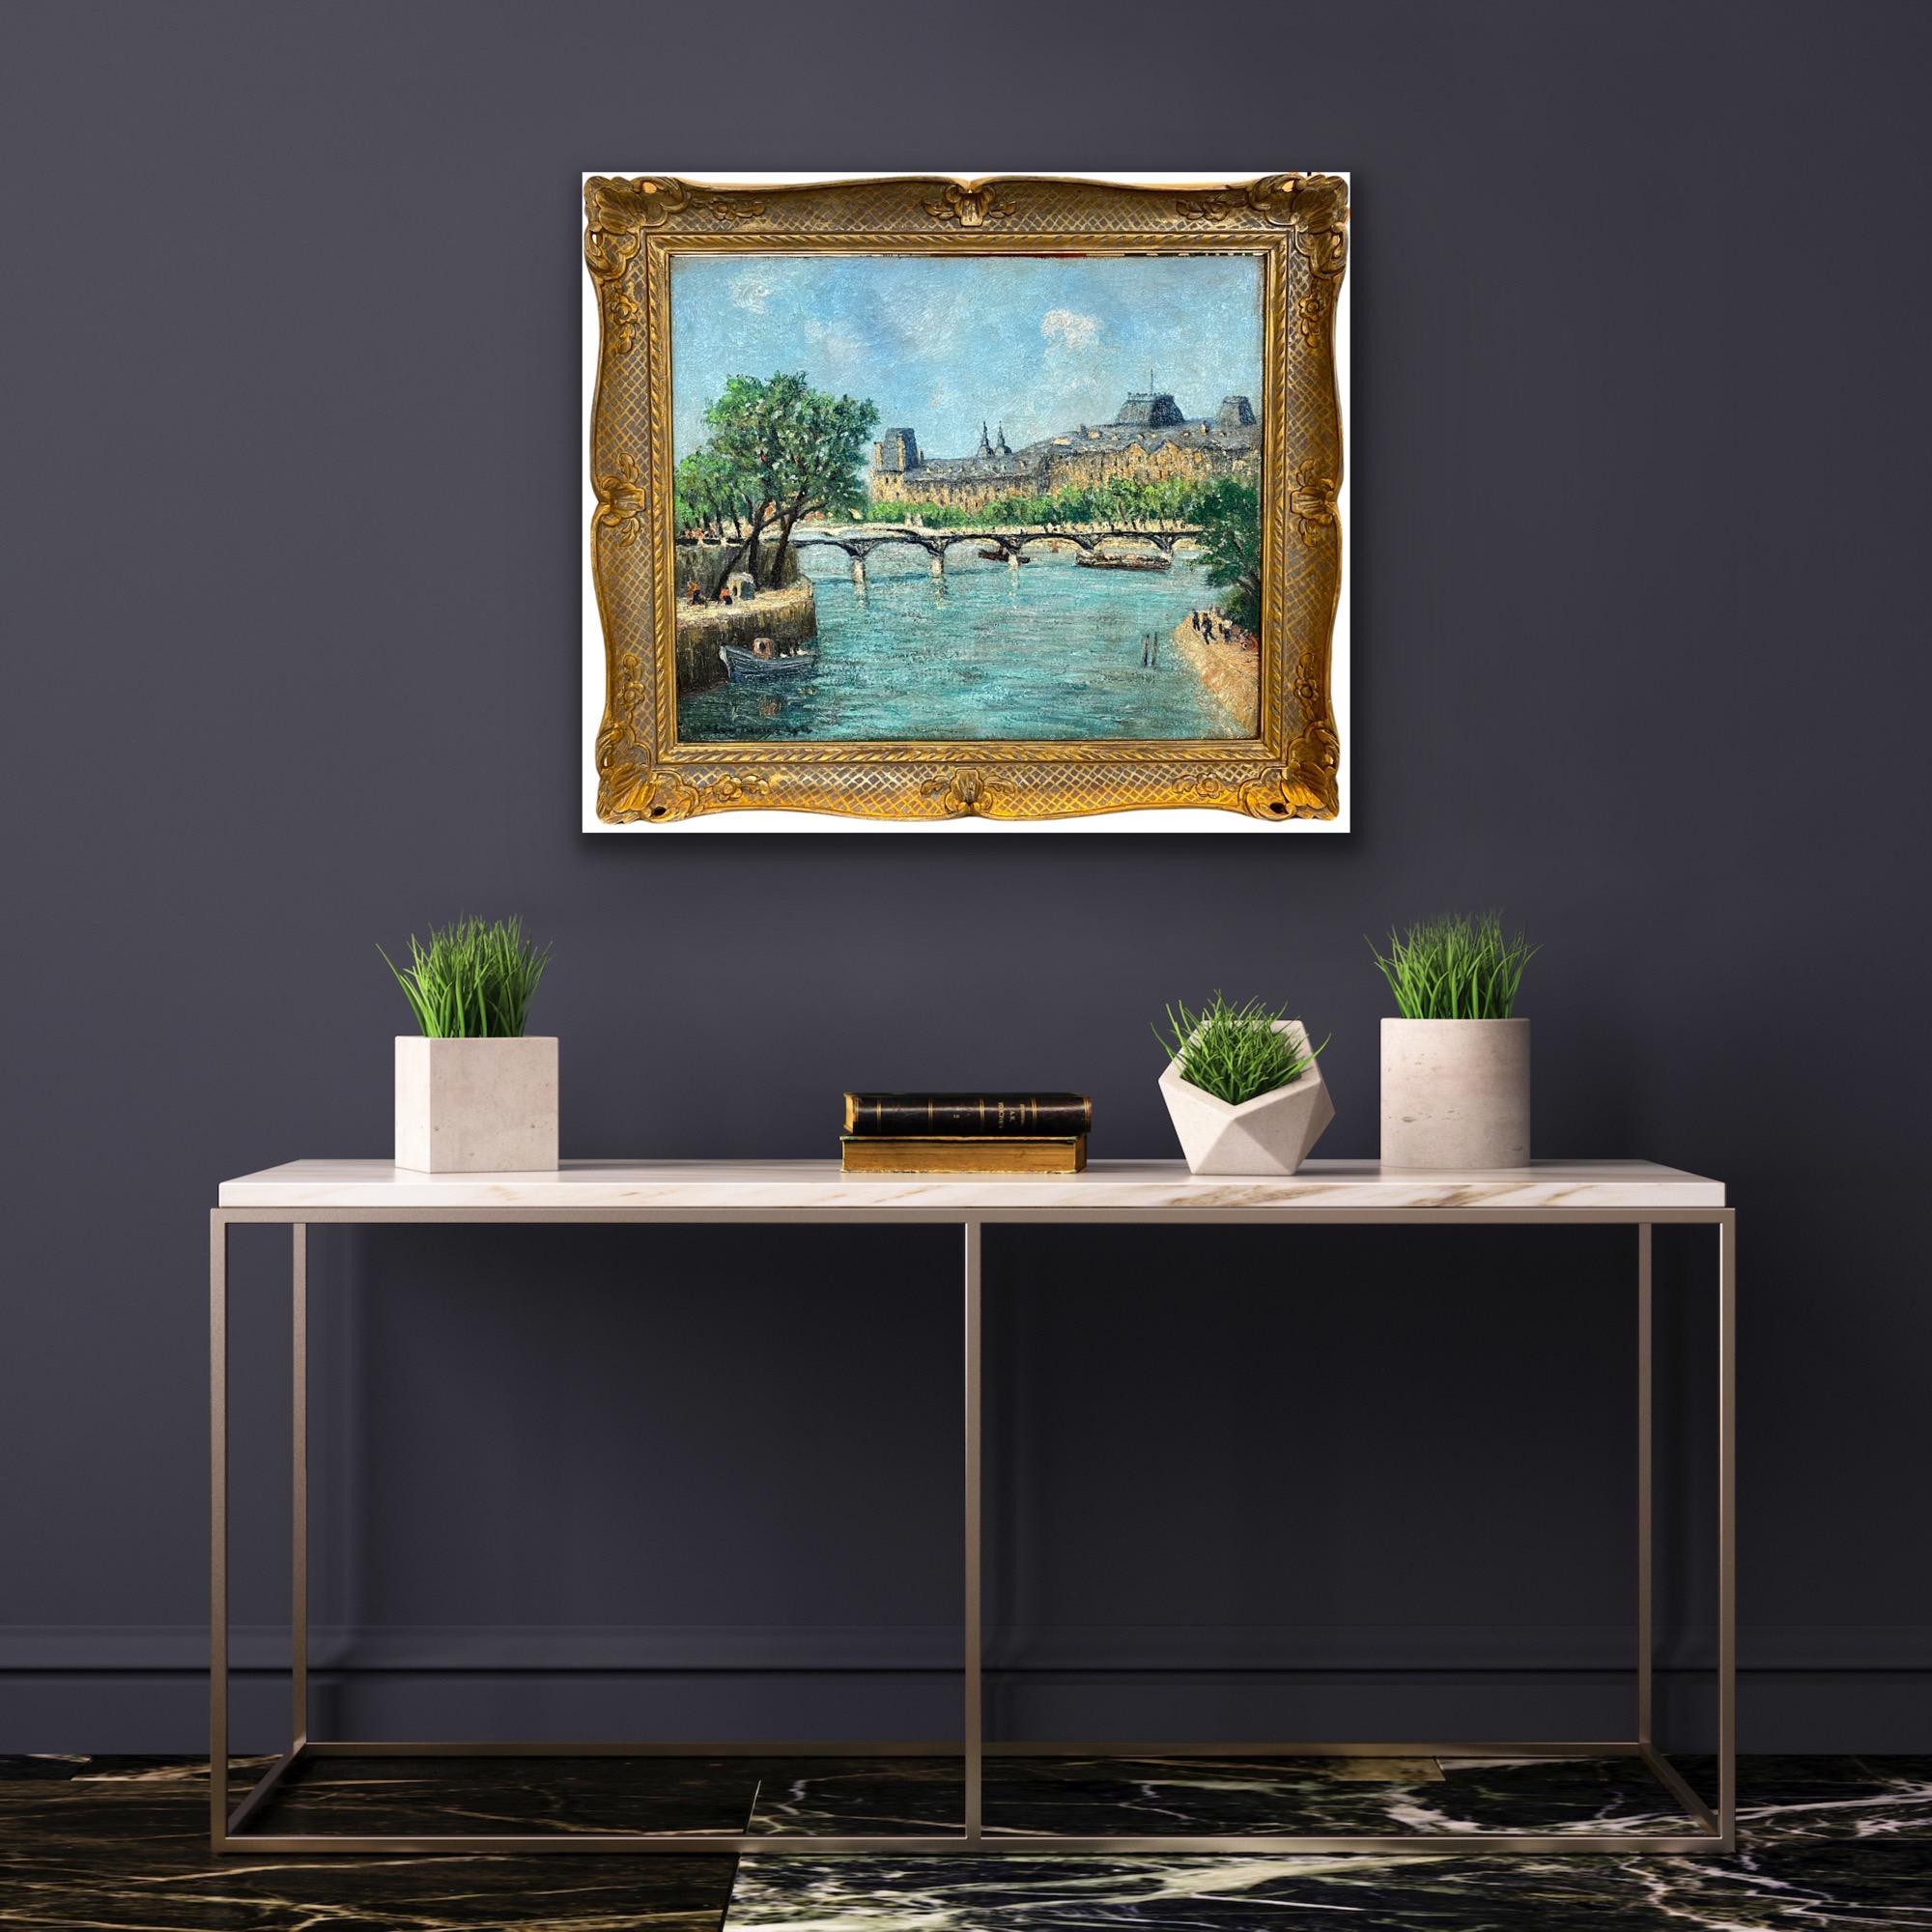 Large French 19th century style Impressionist painting - Seine in Paris - Monet - Painting by Unknown